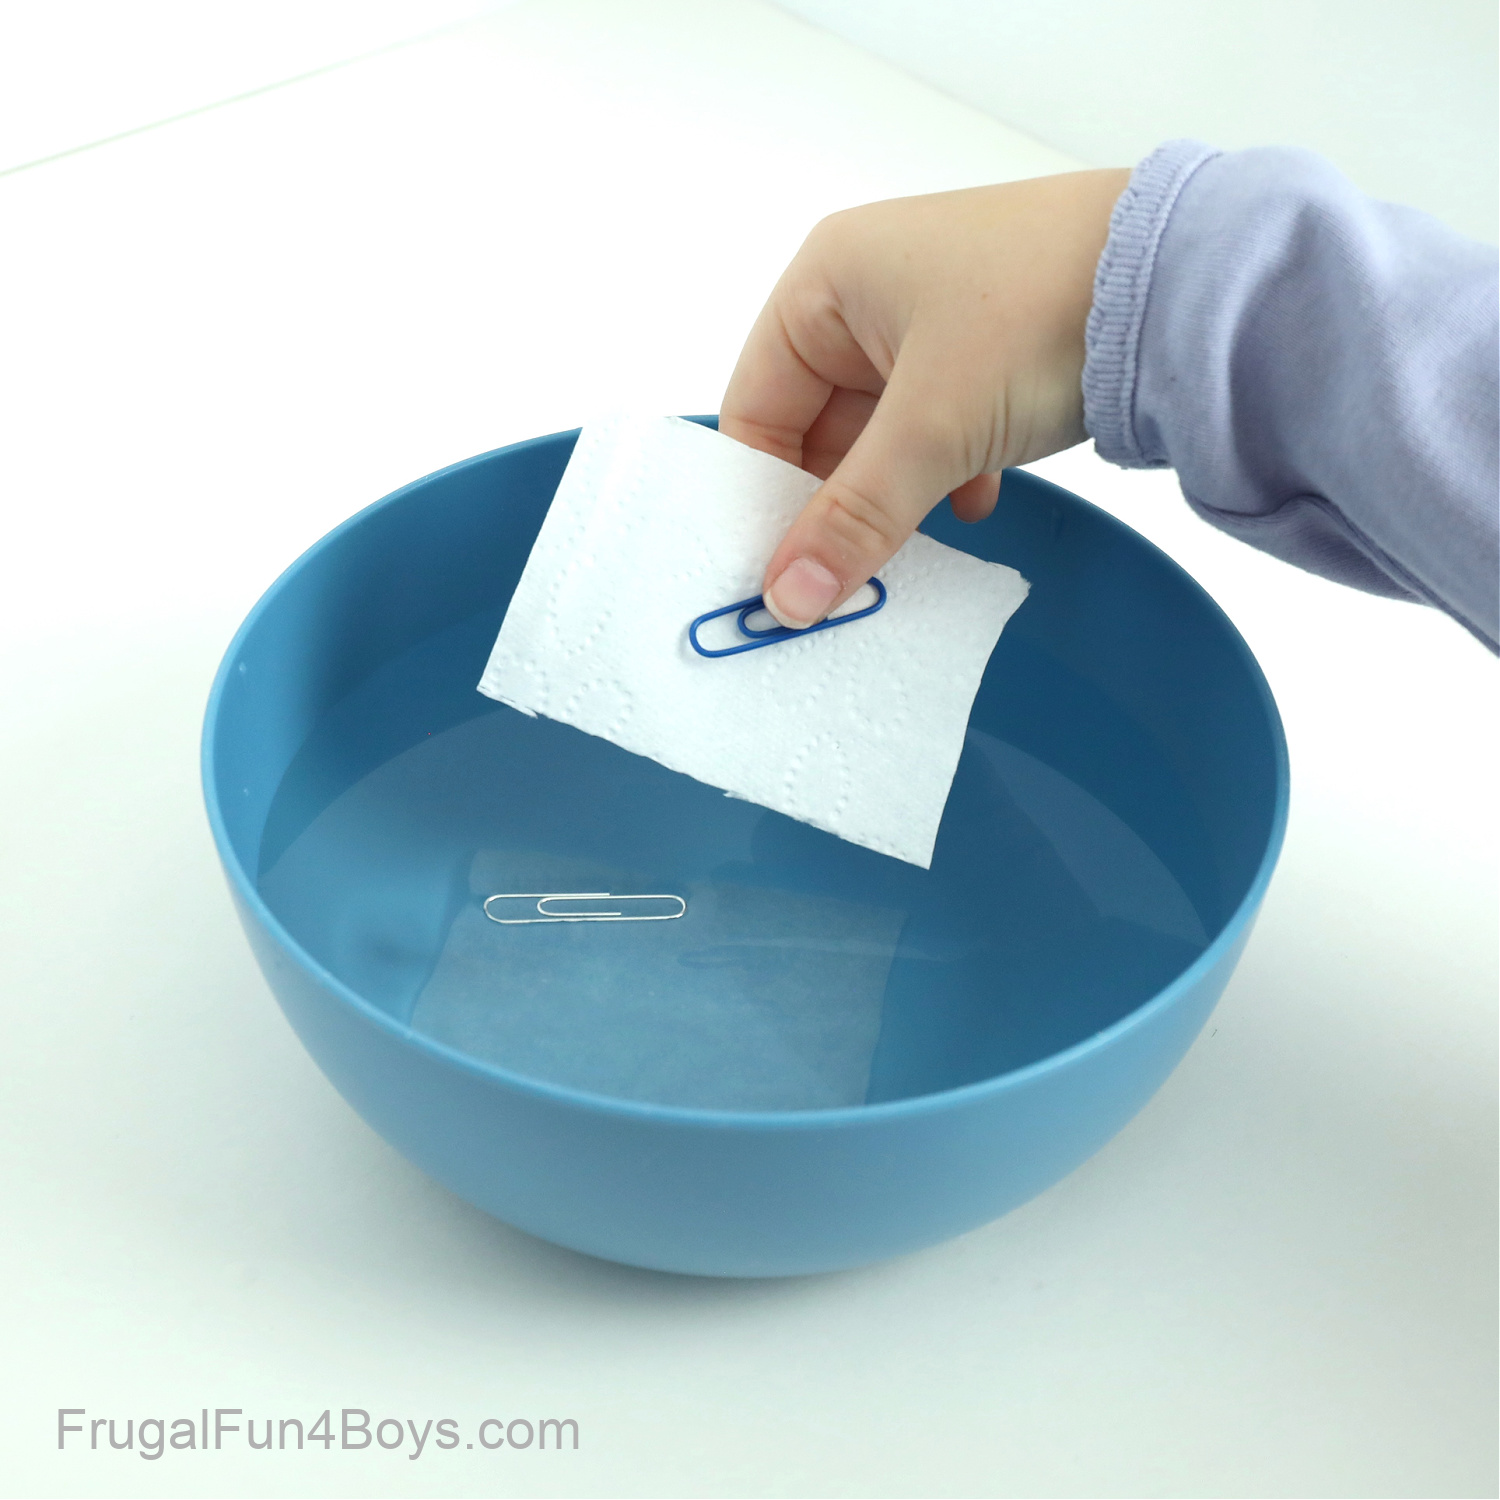 Floating Paper Clip Science Experiment